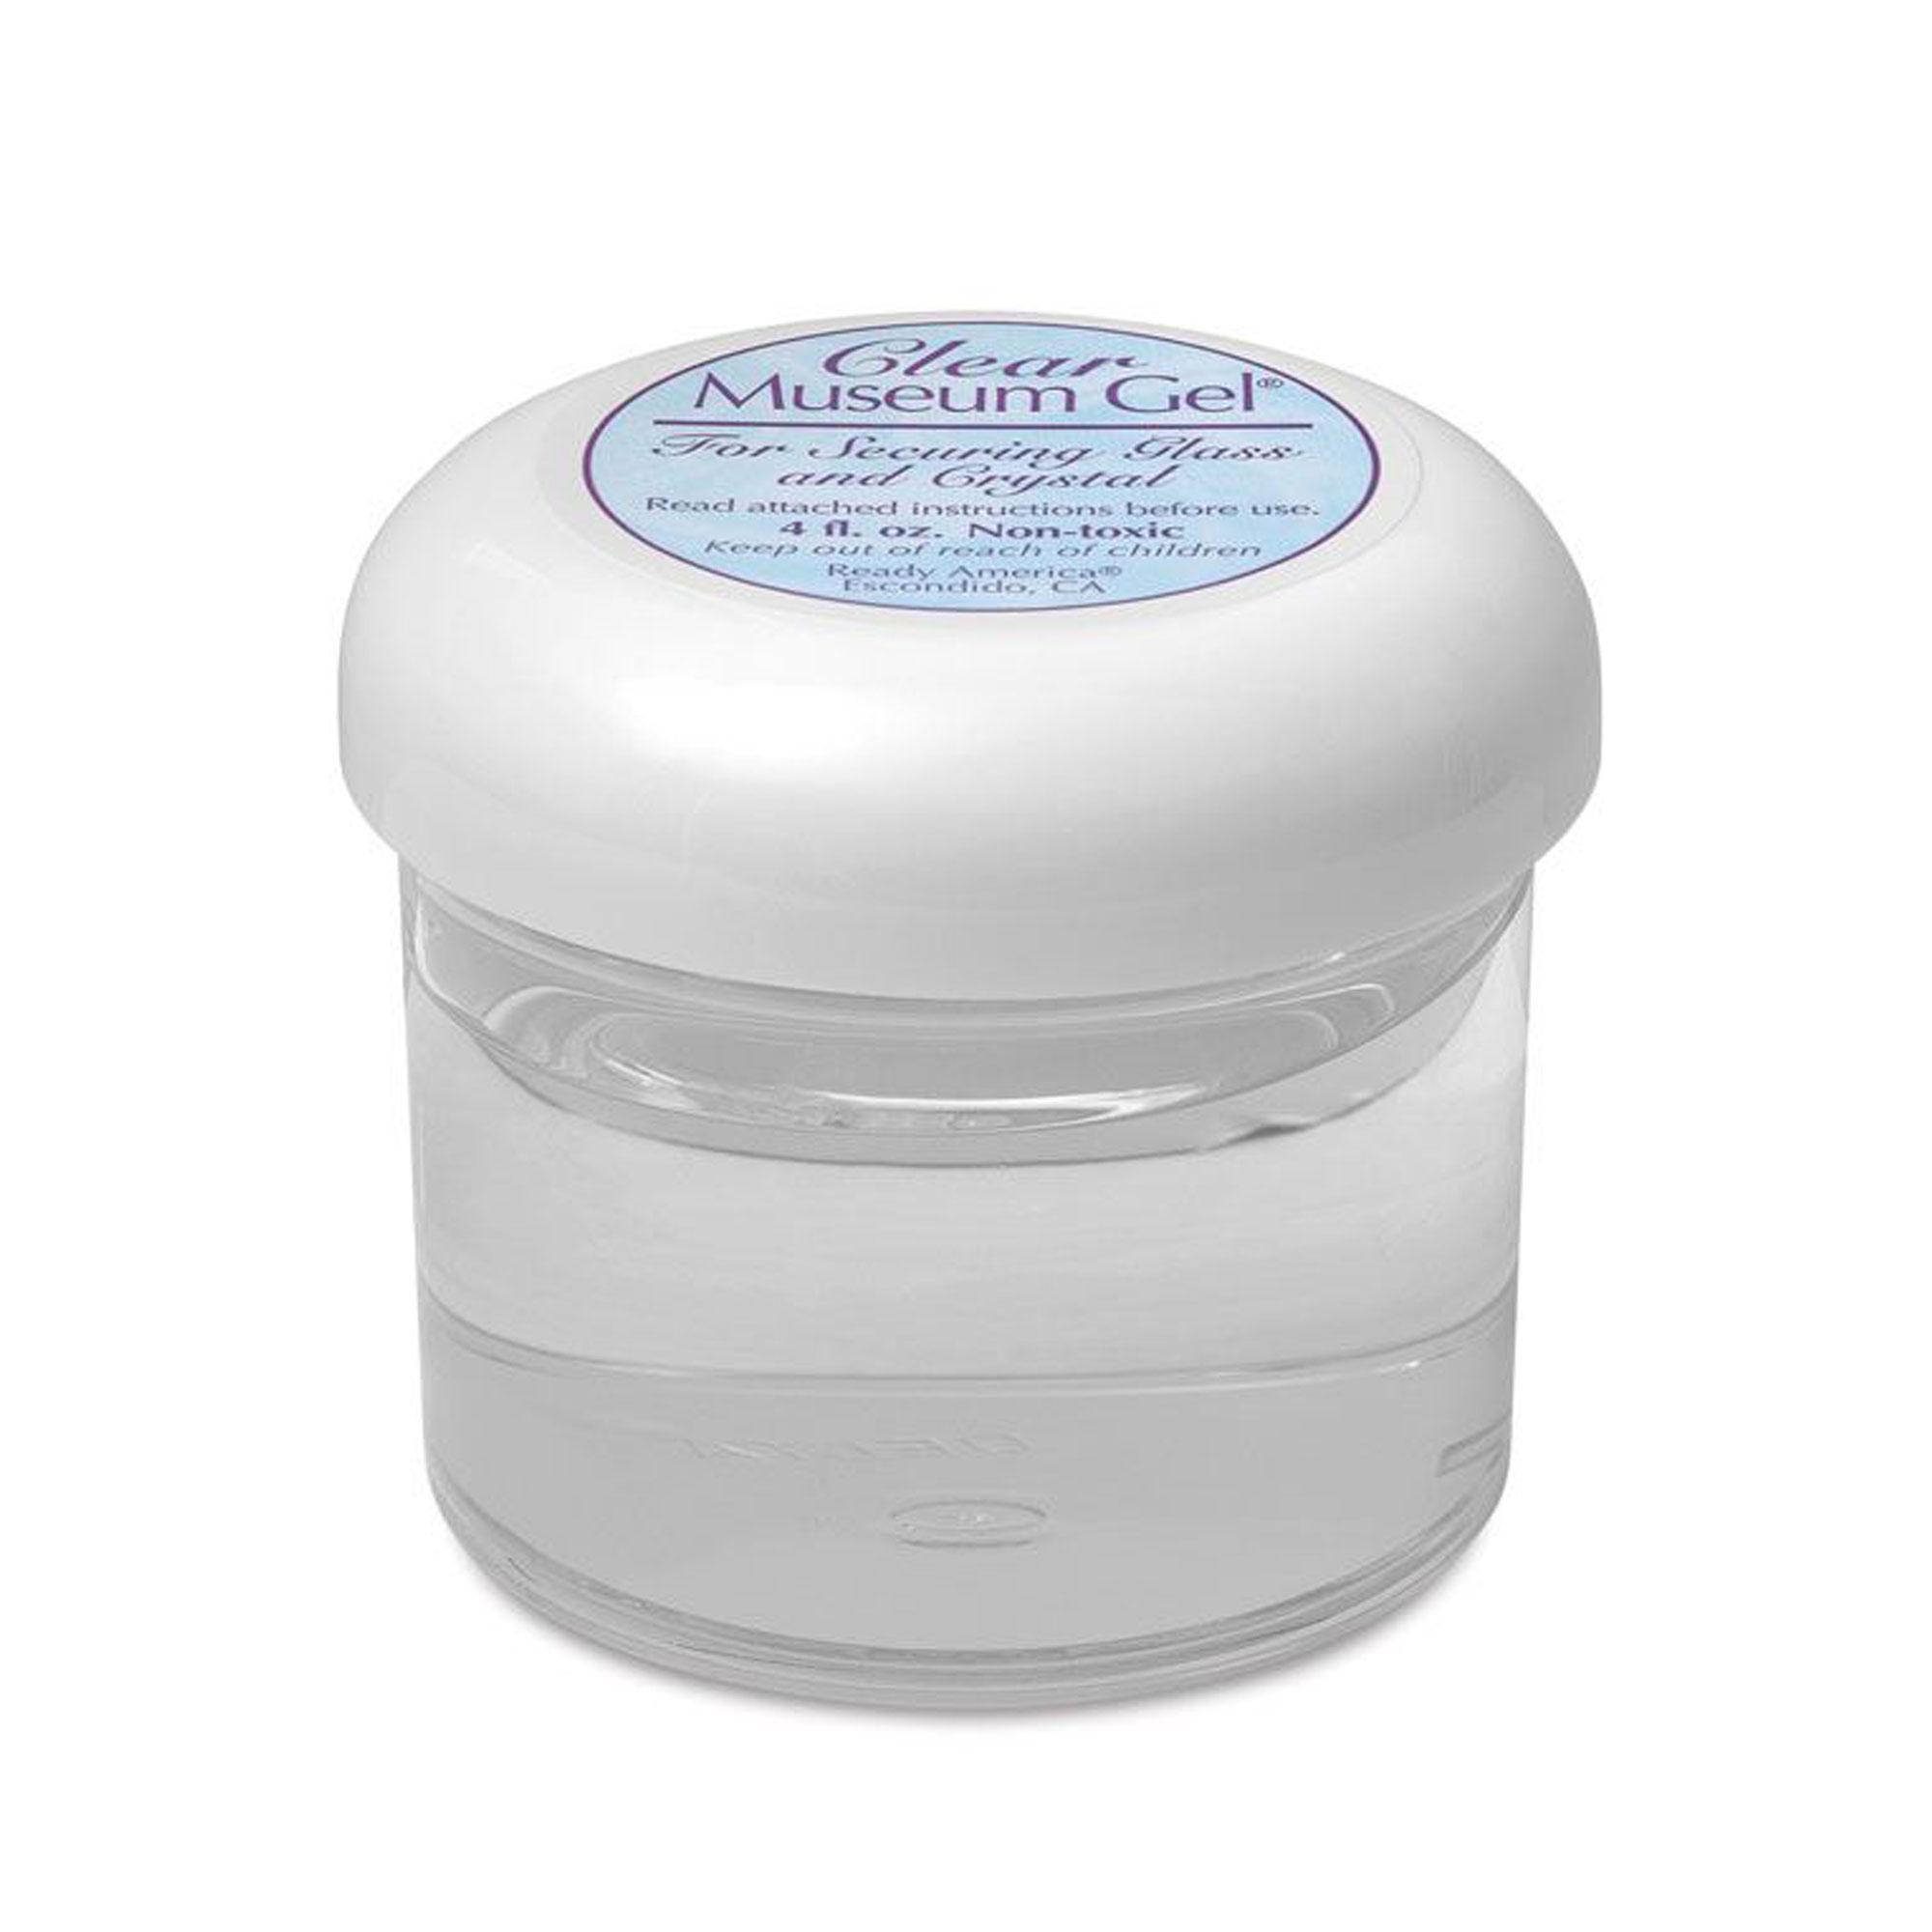 Museum Protective Gel for ornaments & Glassware - Strong Removeable Adhesive Clear tack 115g